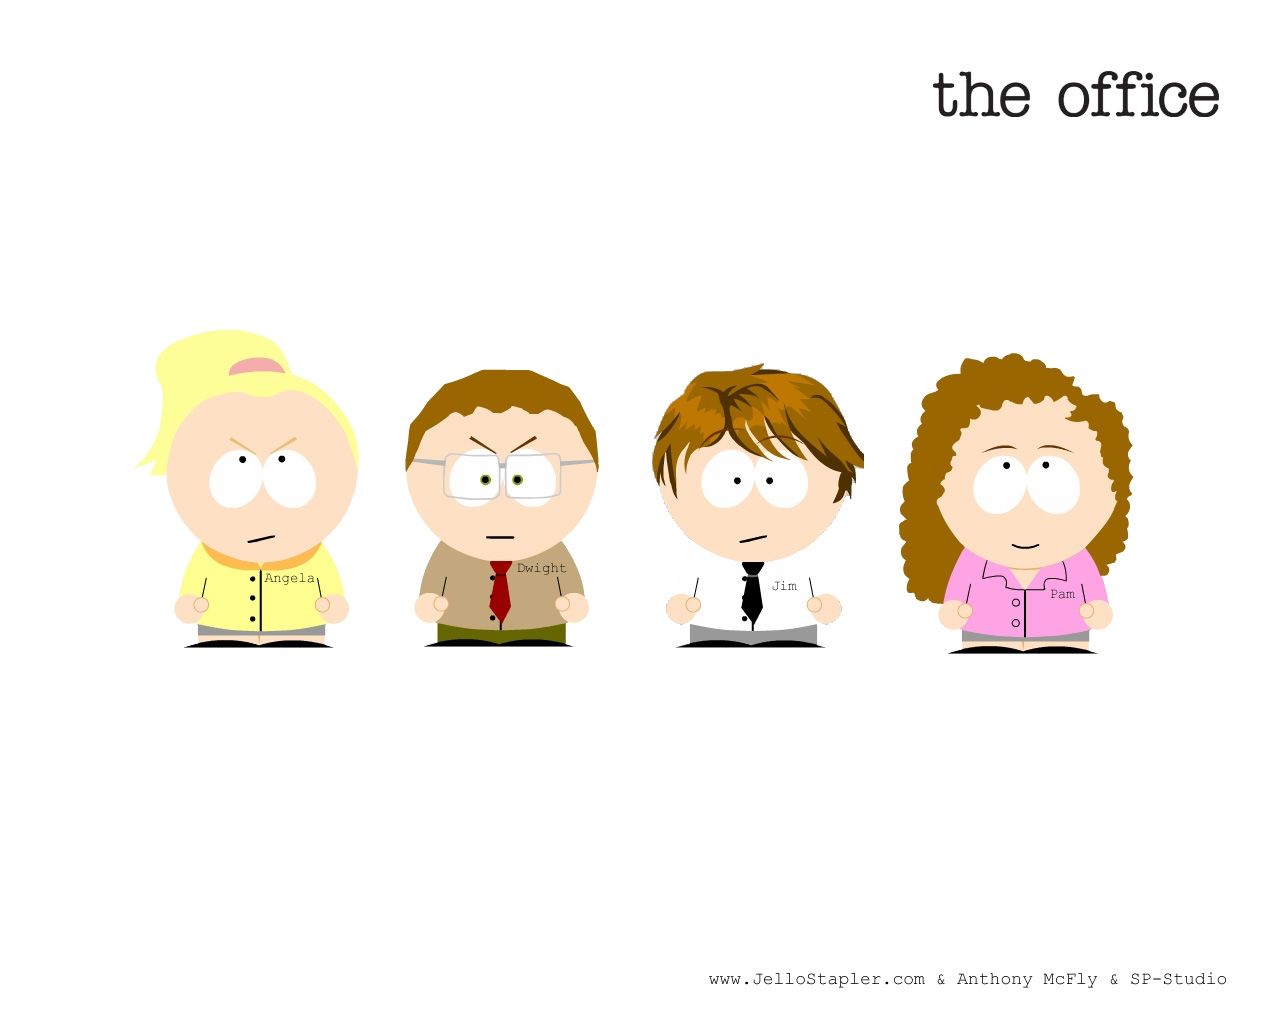 South Park Characters - The Office Wallpaper (455002) - Fanpop